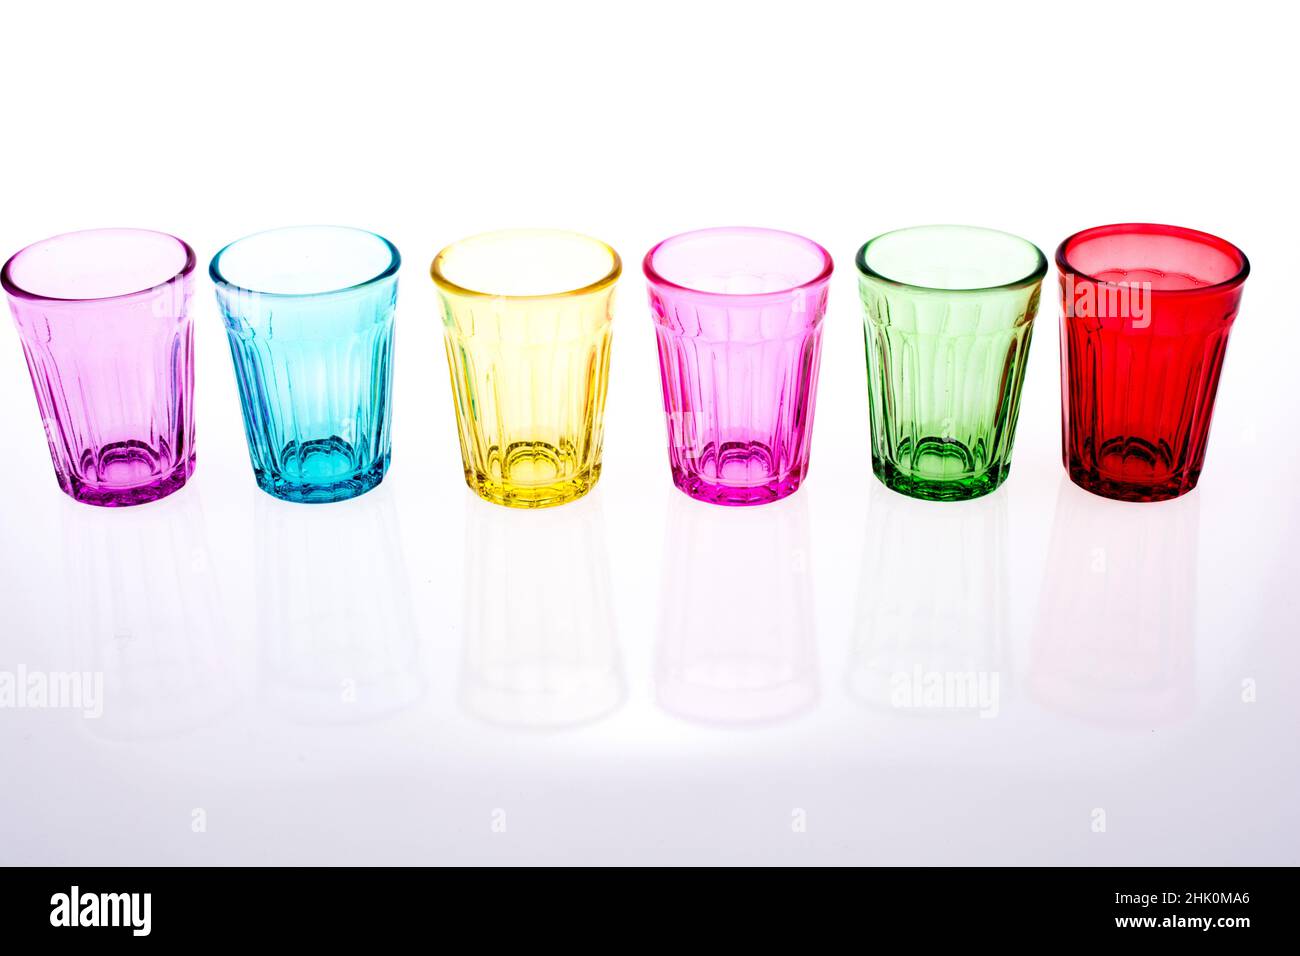 Colorful drinking glass lined up on white background. Stock Photo